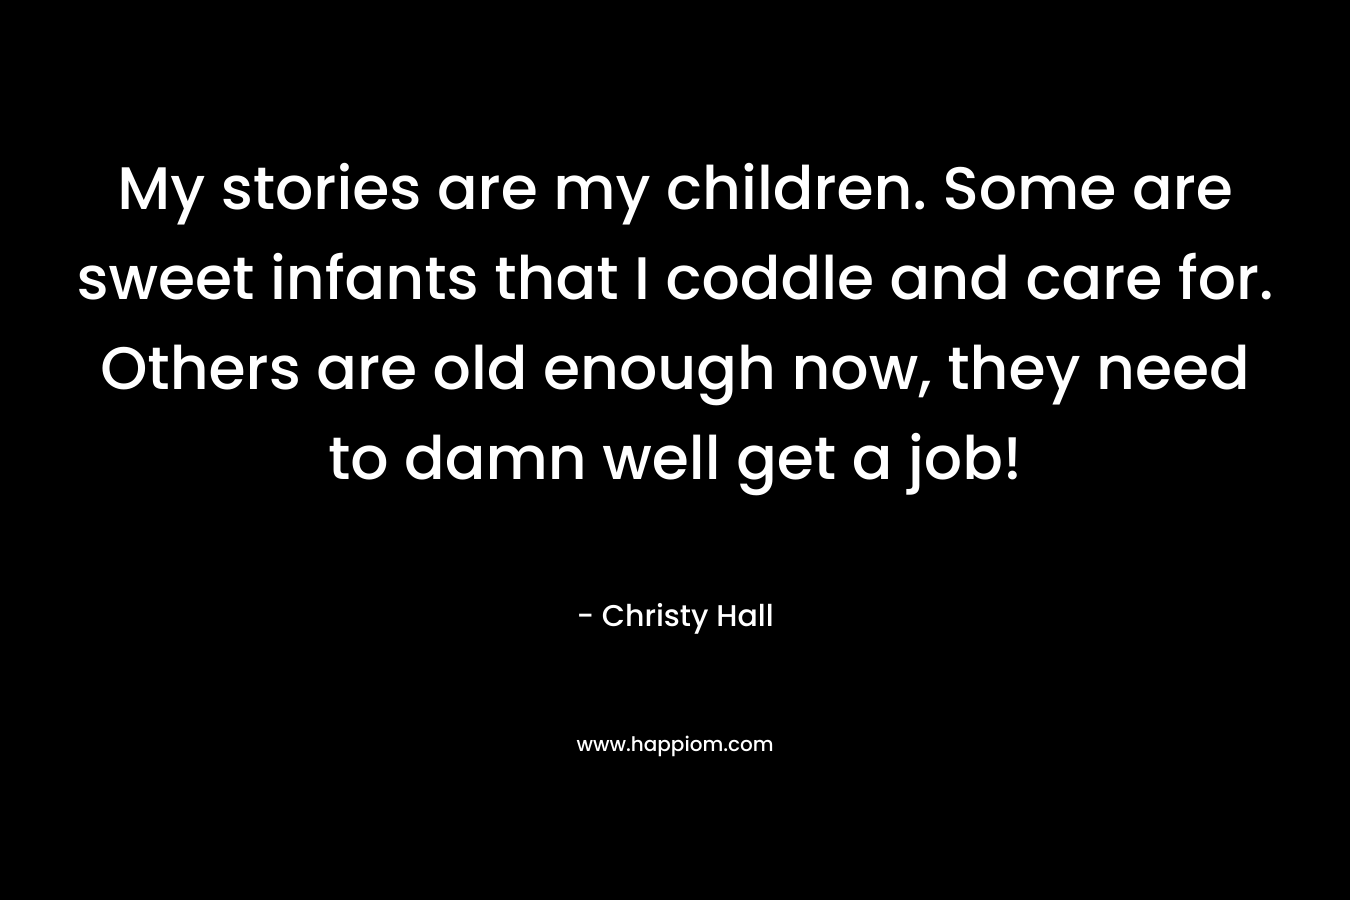 My stories are my children. Some are sweet infants that I coddle and care for. Others are old enough now, they need to damn well get a job!